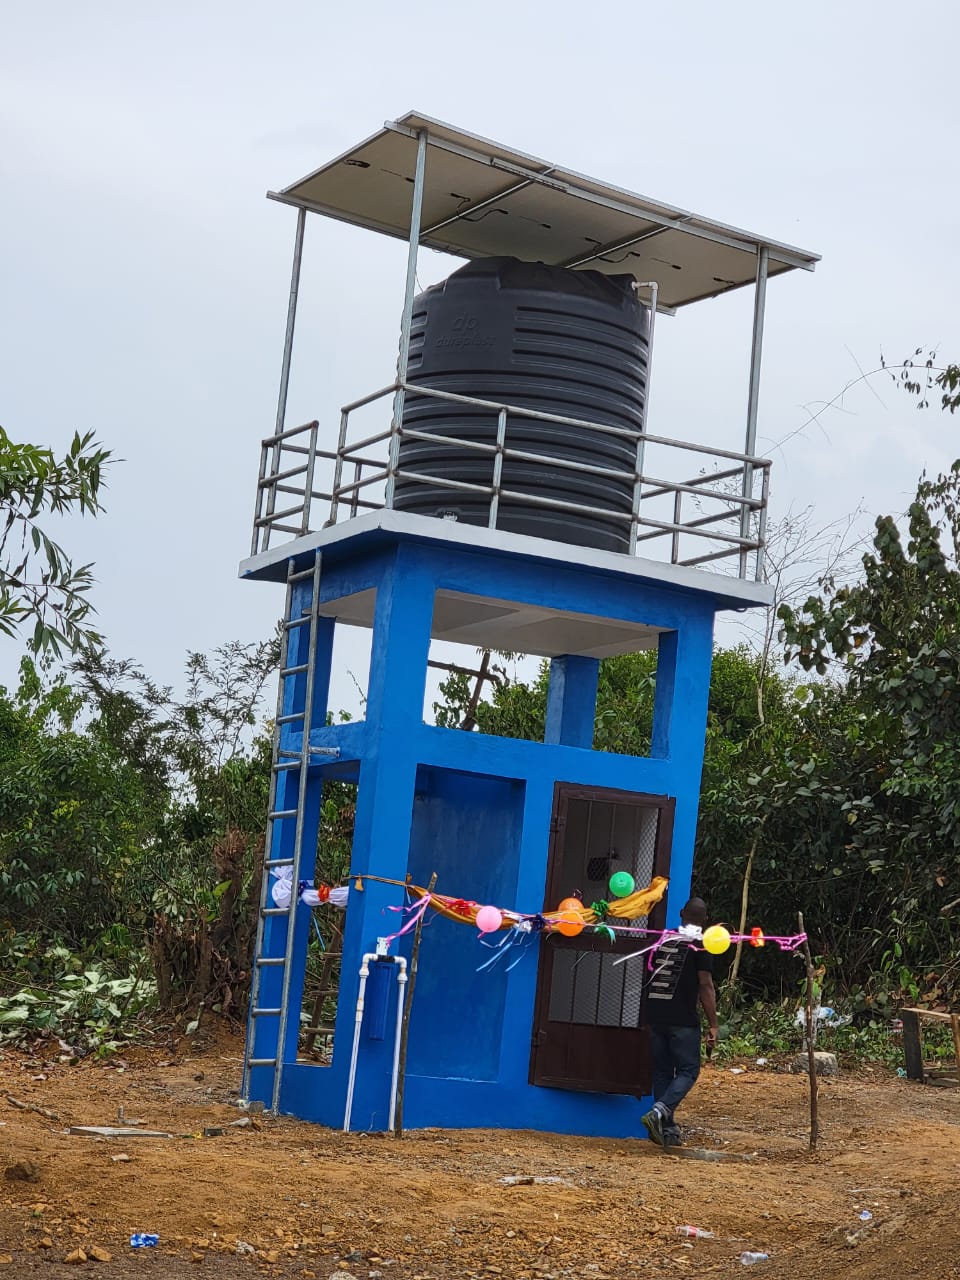 Water tower installed in a community providing safe water